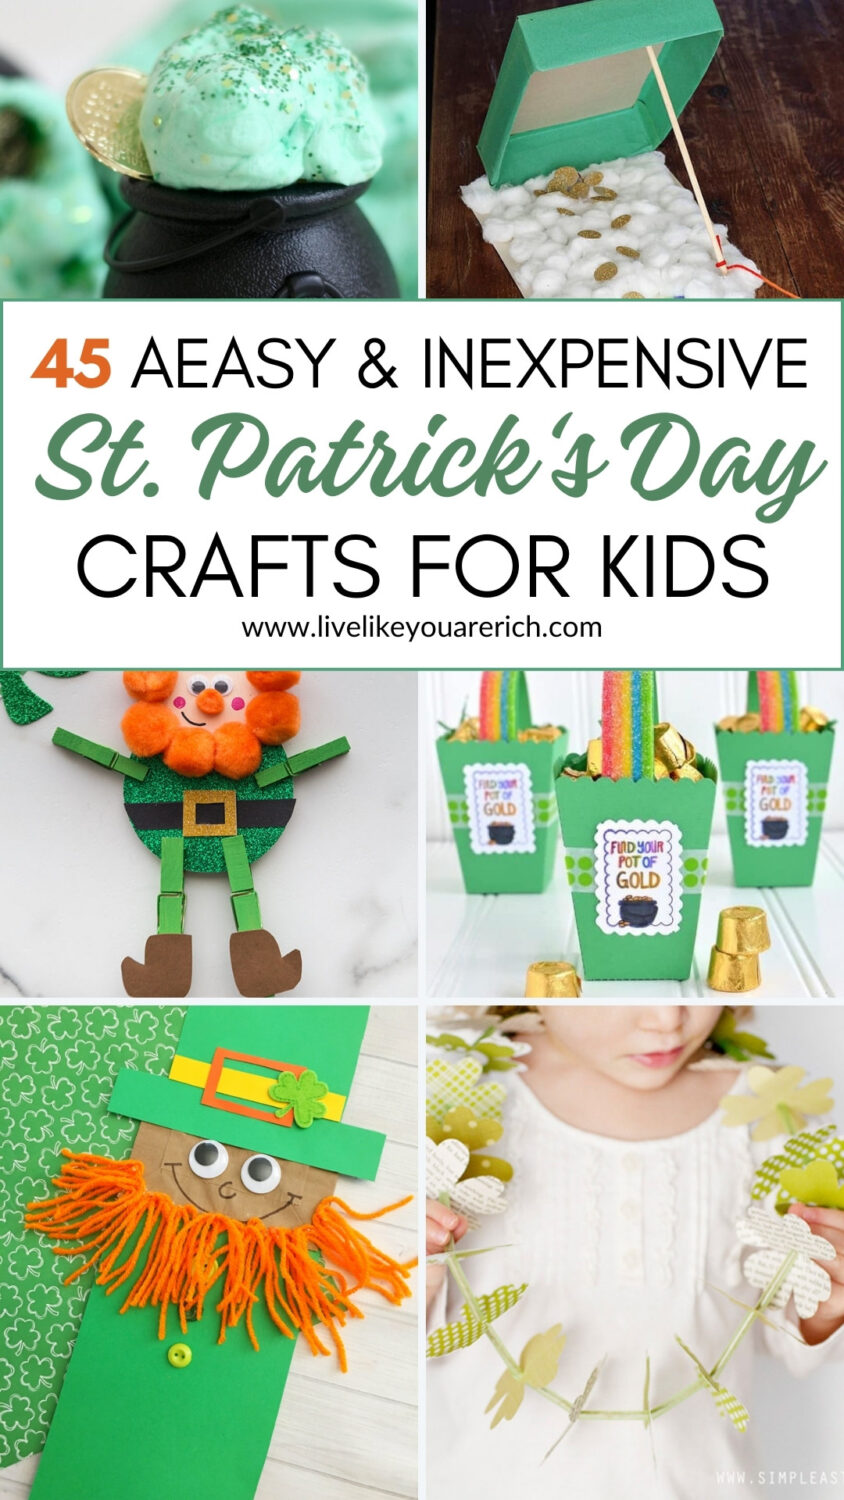 45 Easy and Inexpensive St. Patrick's Day Craft for Kids